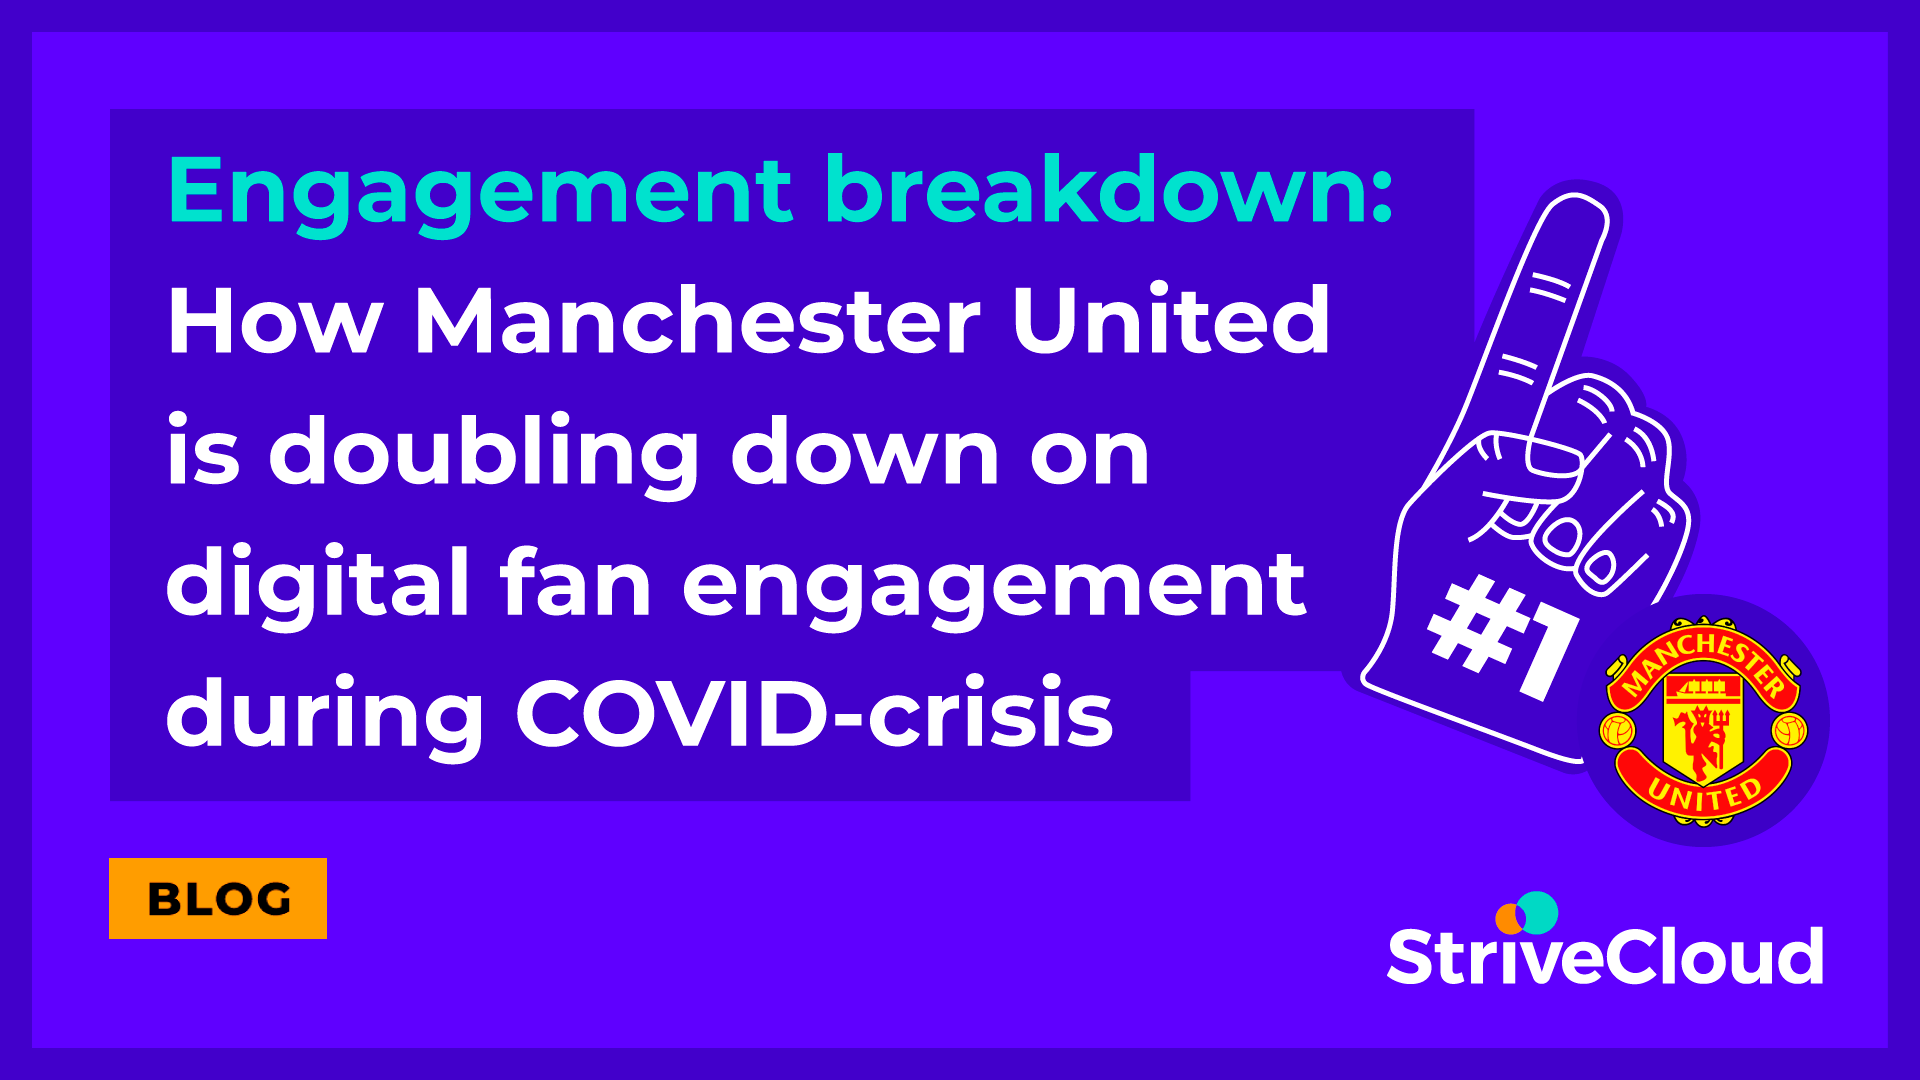 Engagement breakdown: How Manchester United is doubling down on digital fan engagement during COVID-crisis